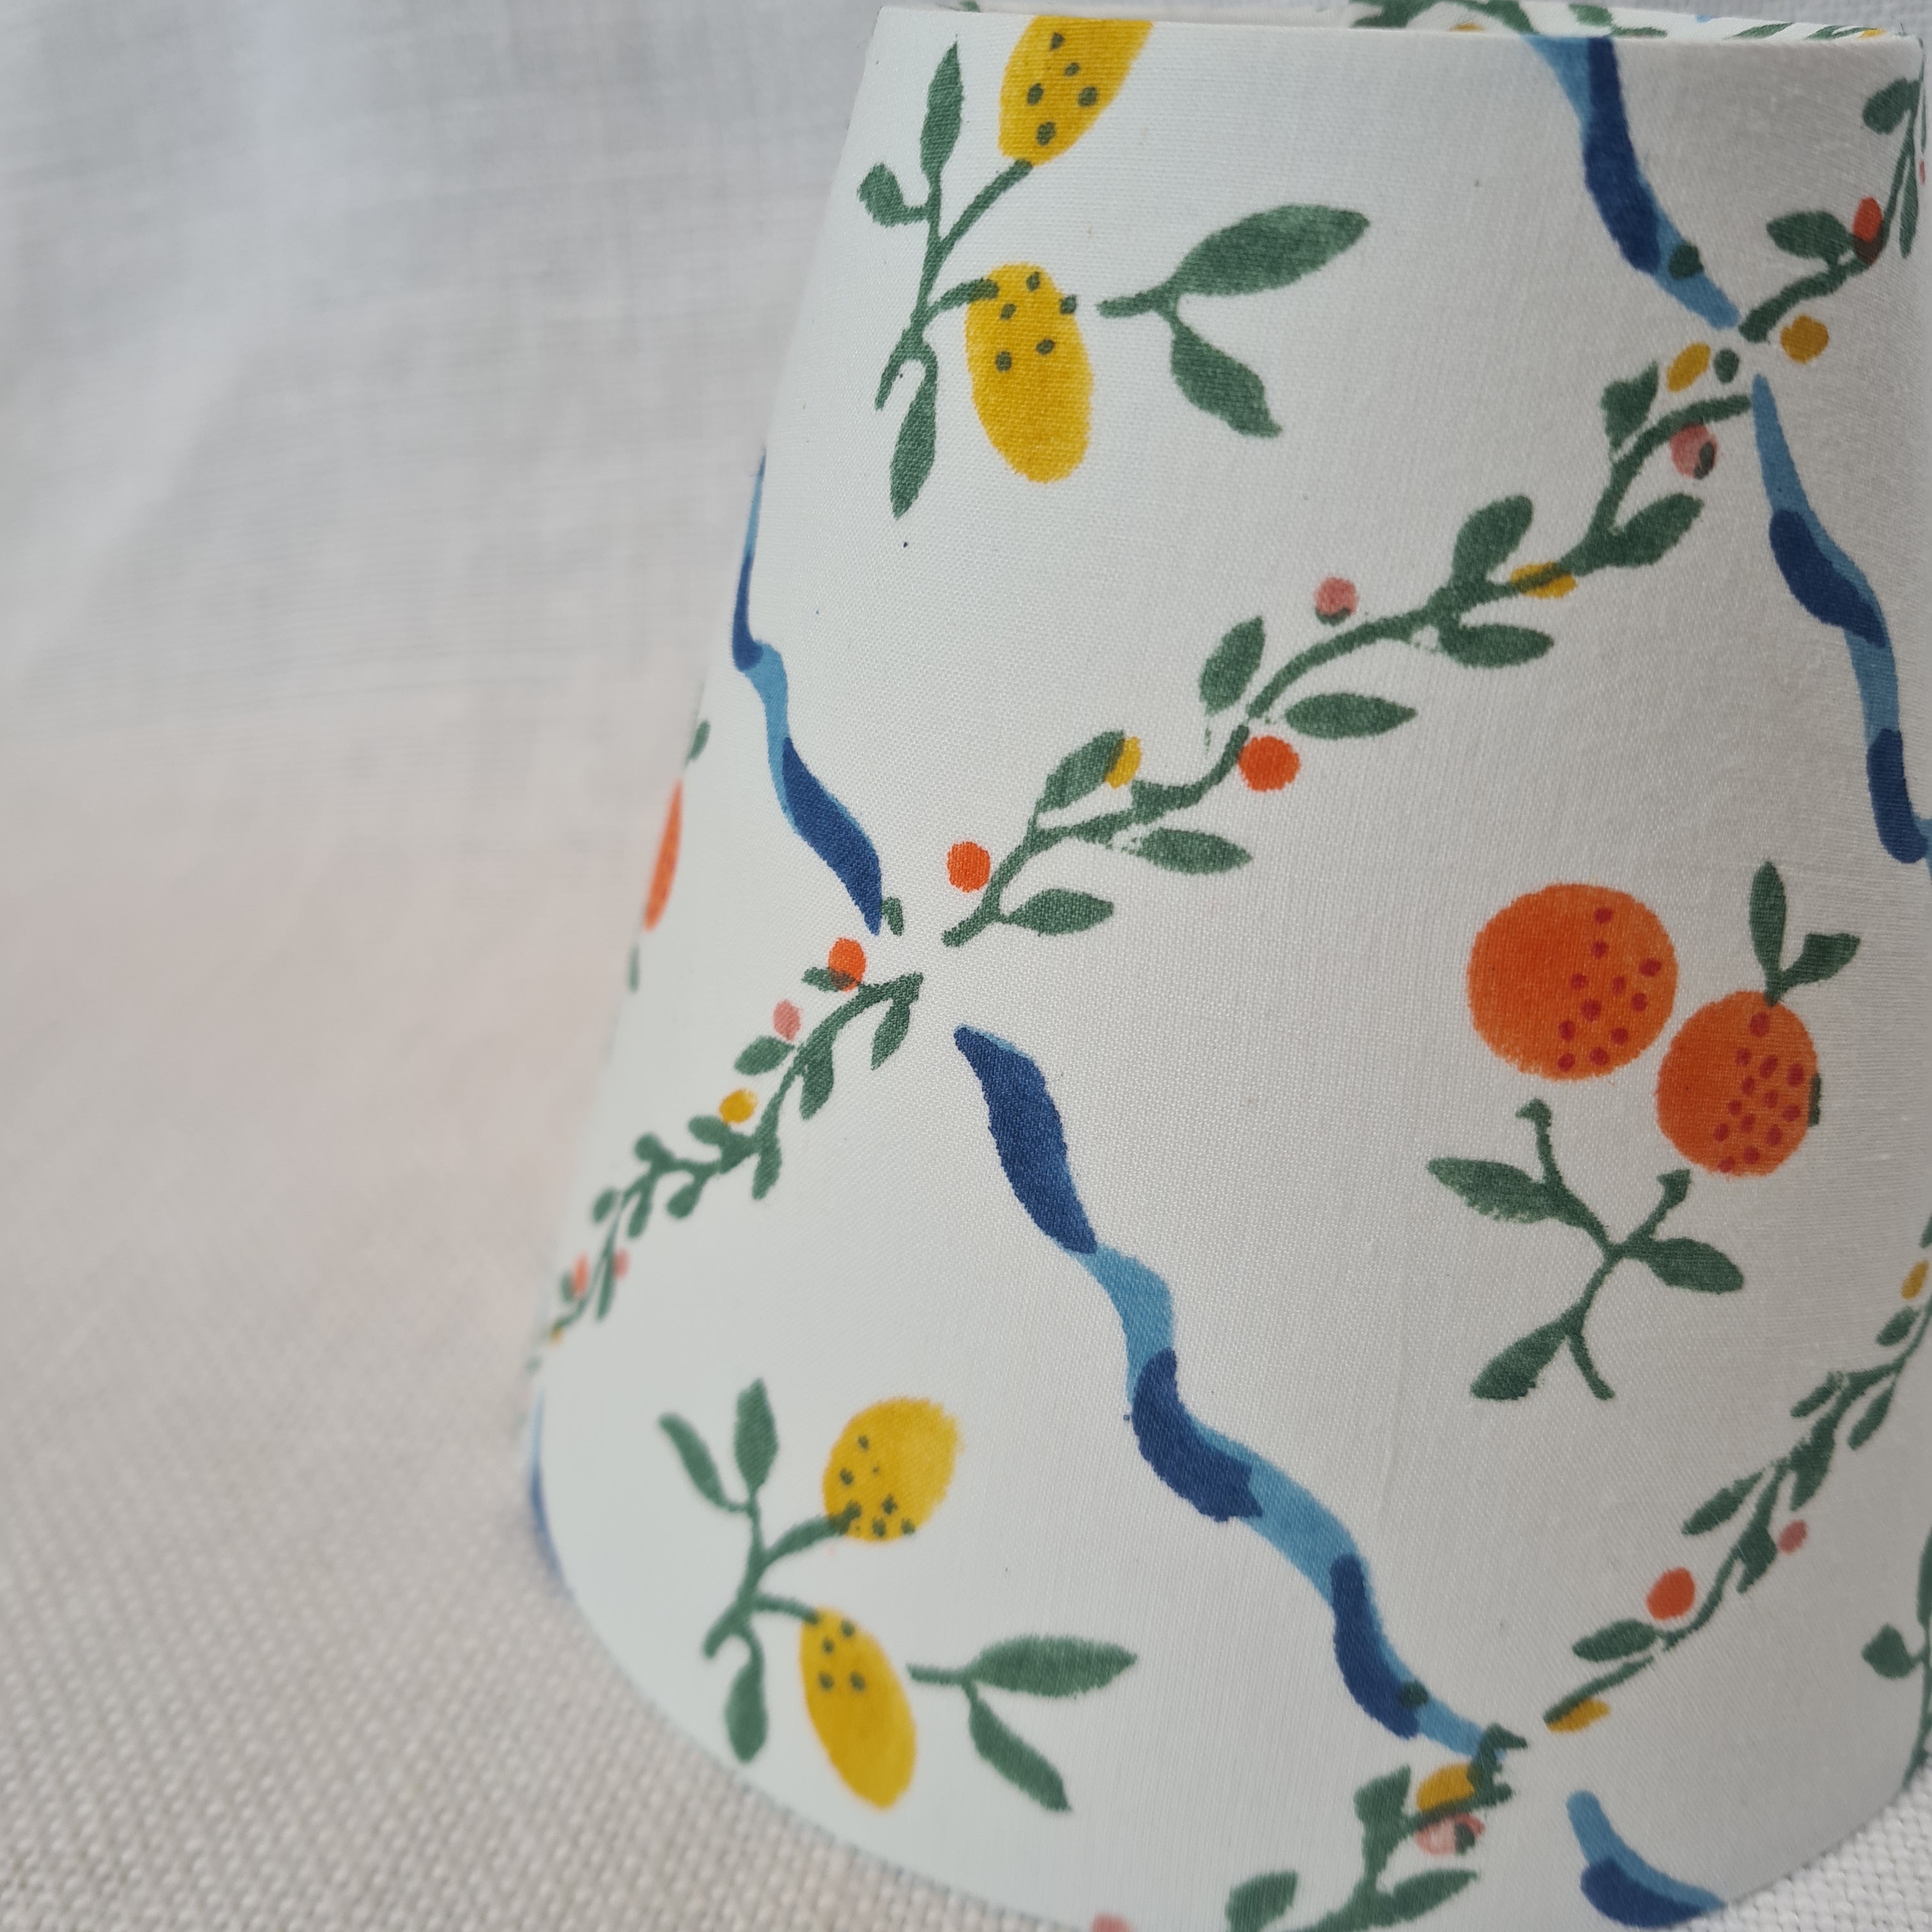 Haines x Daydress, Citrus Ribbons Lampshade